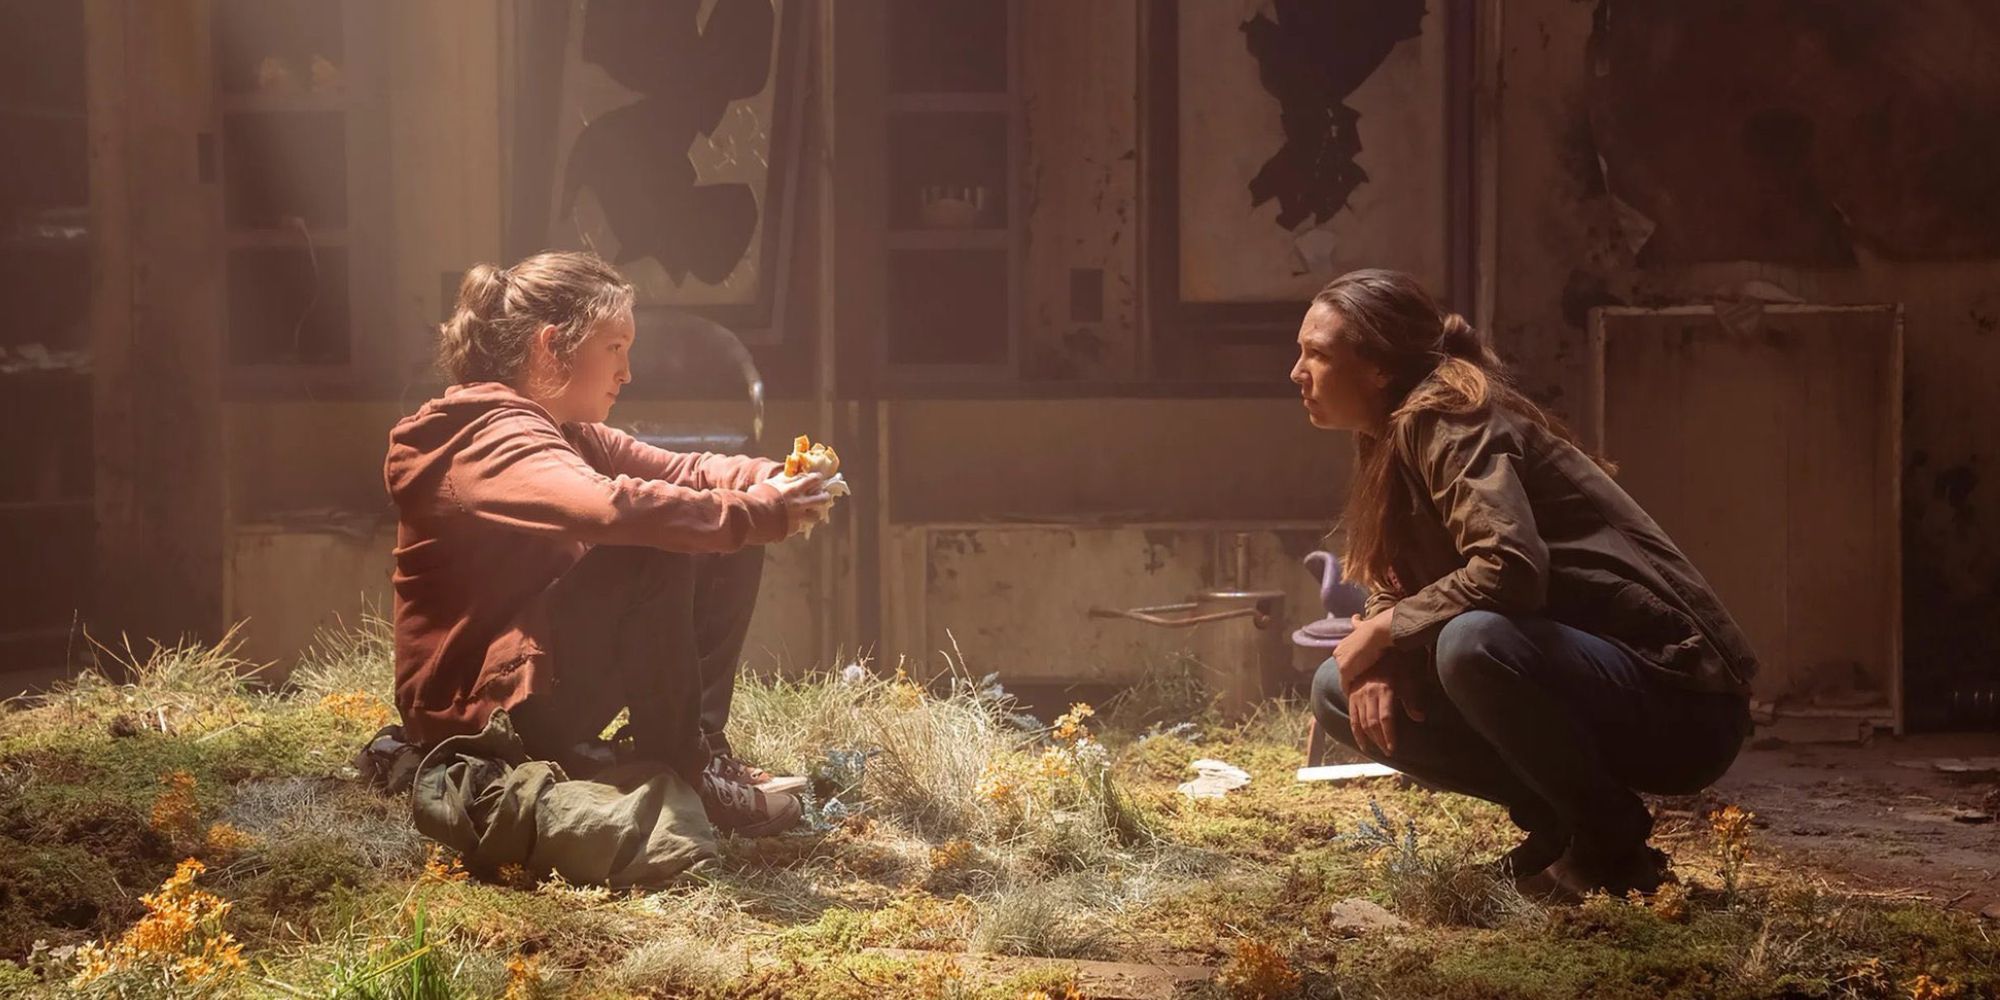 Image showing Ellie and Tess in The Last Of Us TV show with Ellie sitting down on grass lit by overhead sun inside a building while Tess squats to talk to her